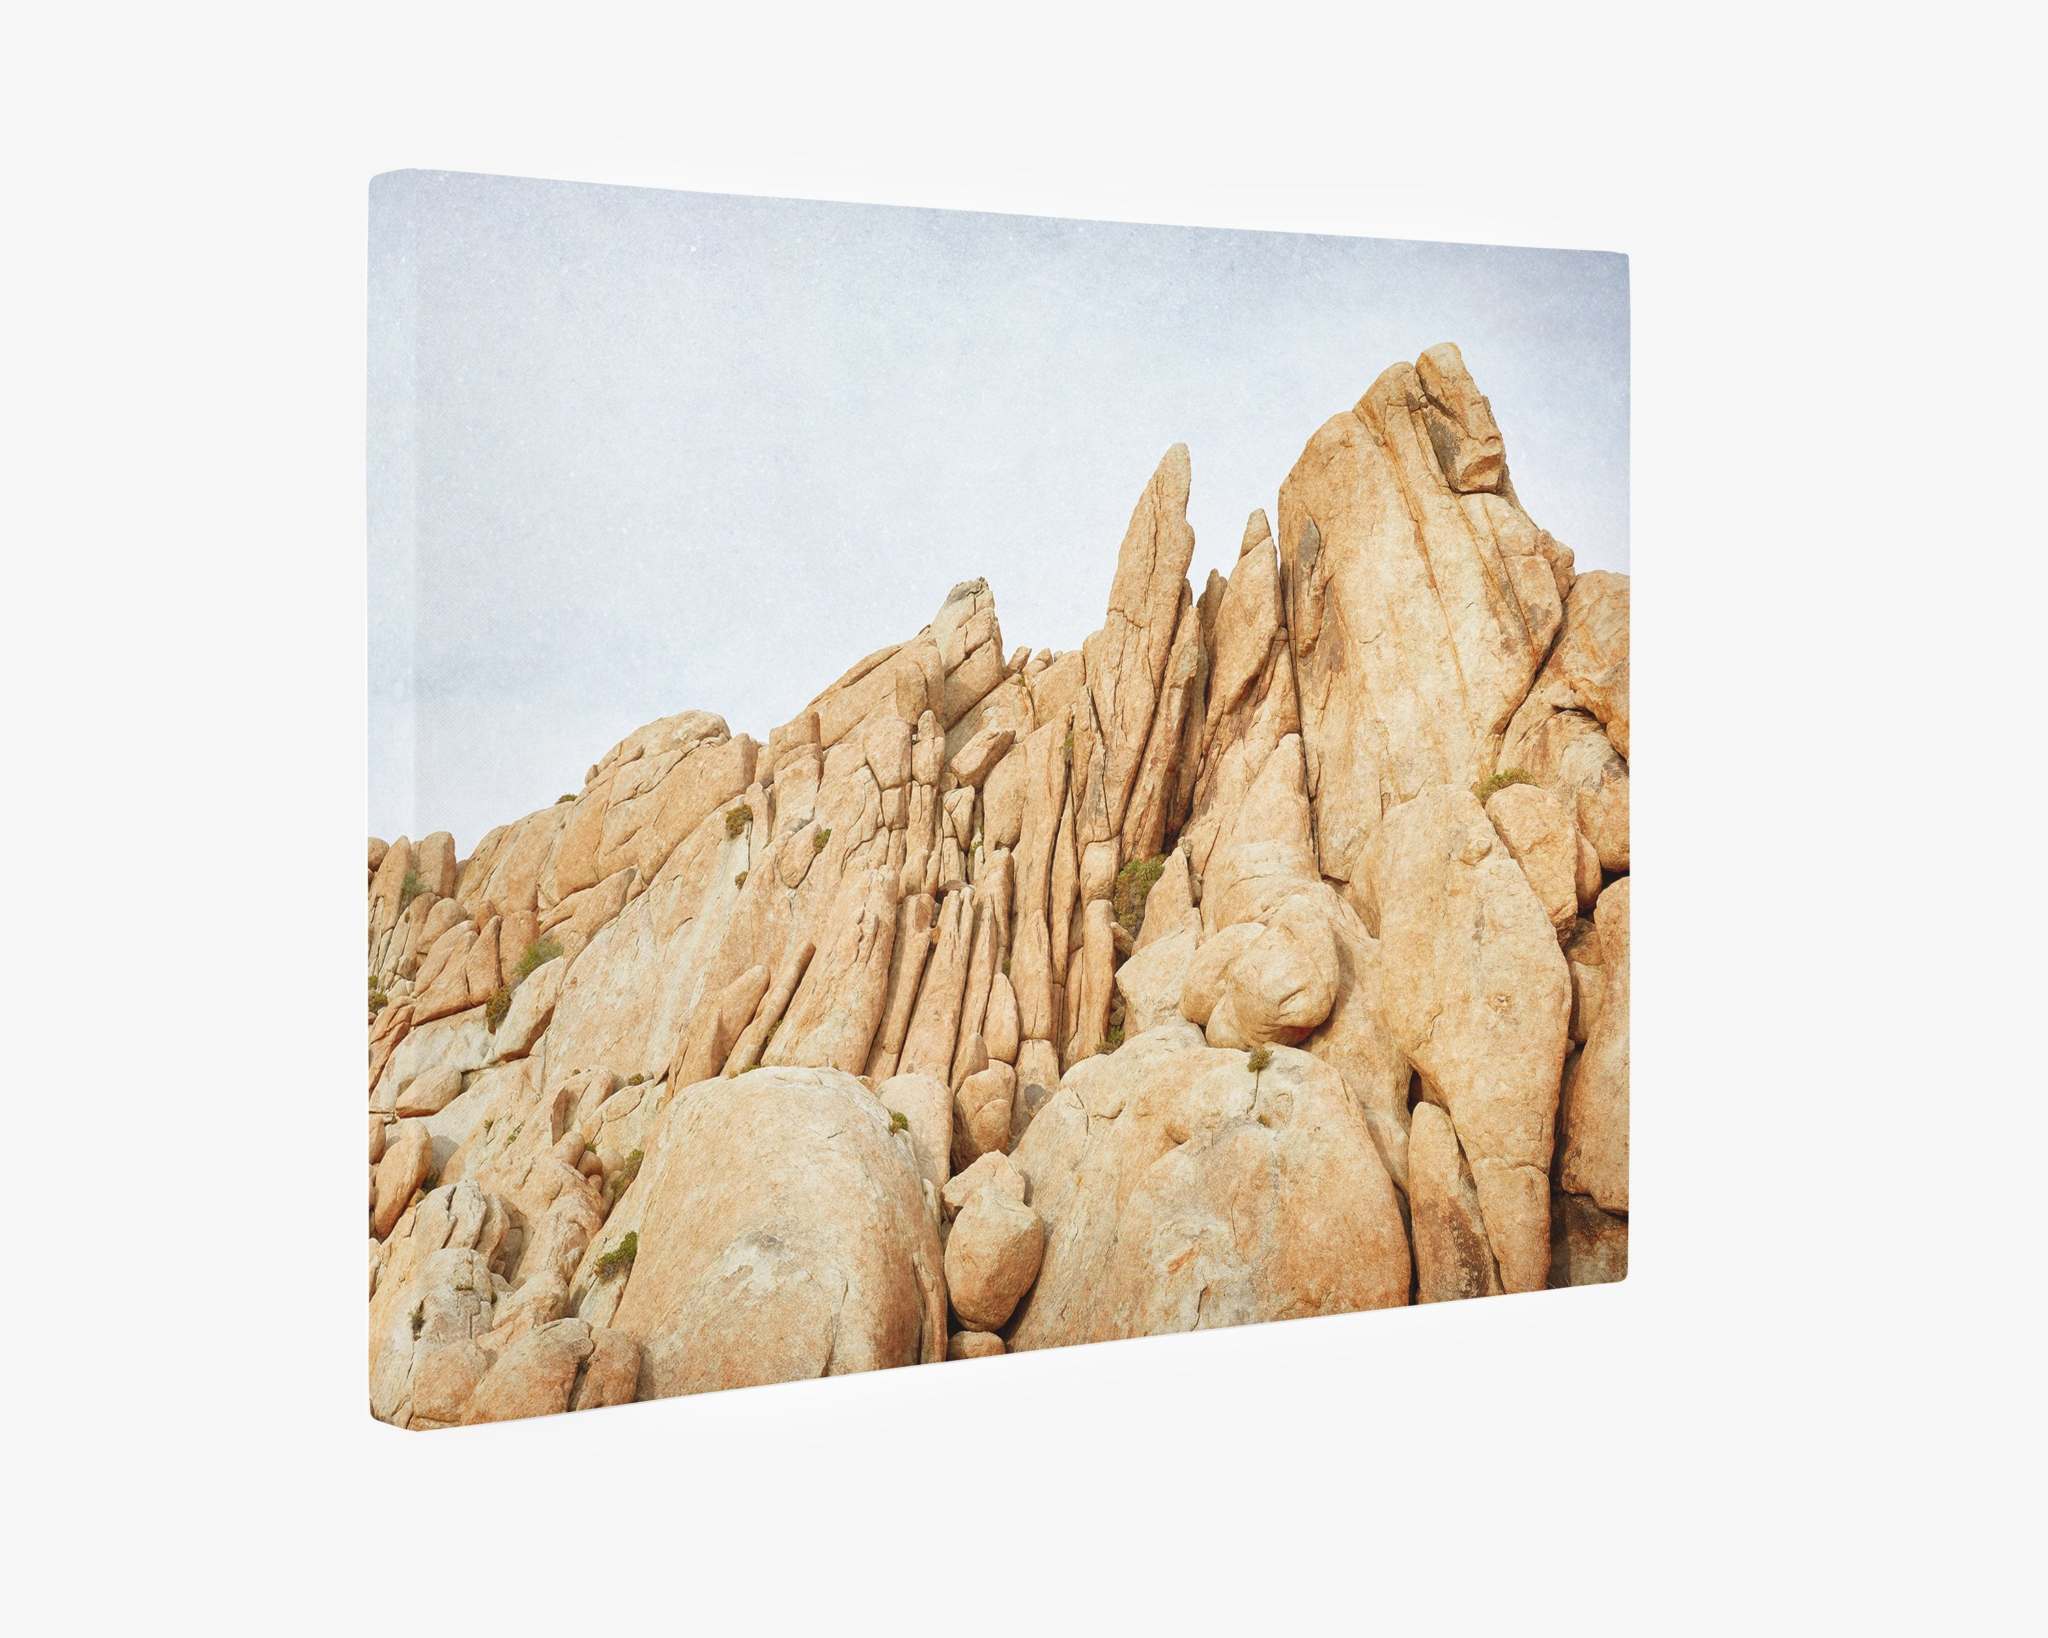 Offley Green Joshua Tree Canvas Wall Art, 'Joshua Rocks' featuring a rugged, rocky desert scene with large, weathered yellow desert rock formations set against a pale sky. The jagged rocks dominate the frame, displaying varied textures and natural erosion, reminiscent of mid-century Palm Springs.